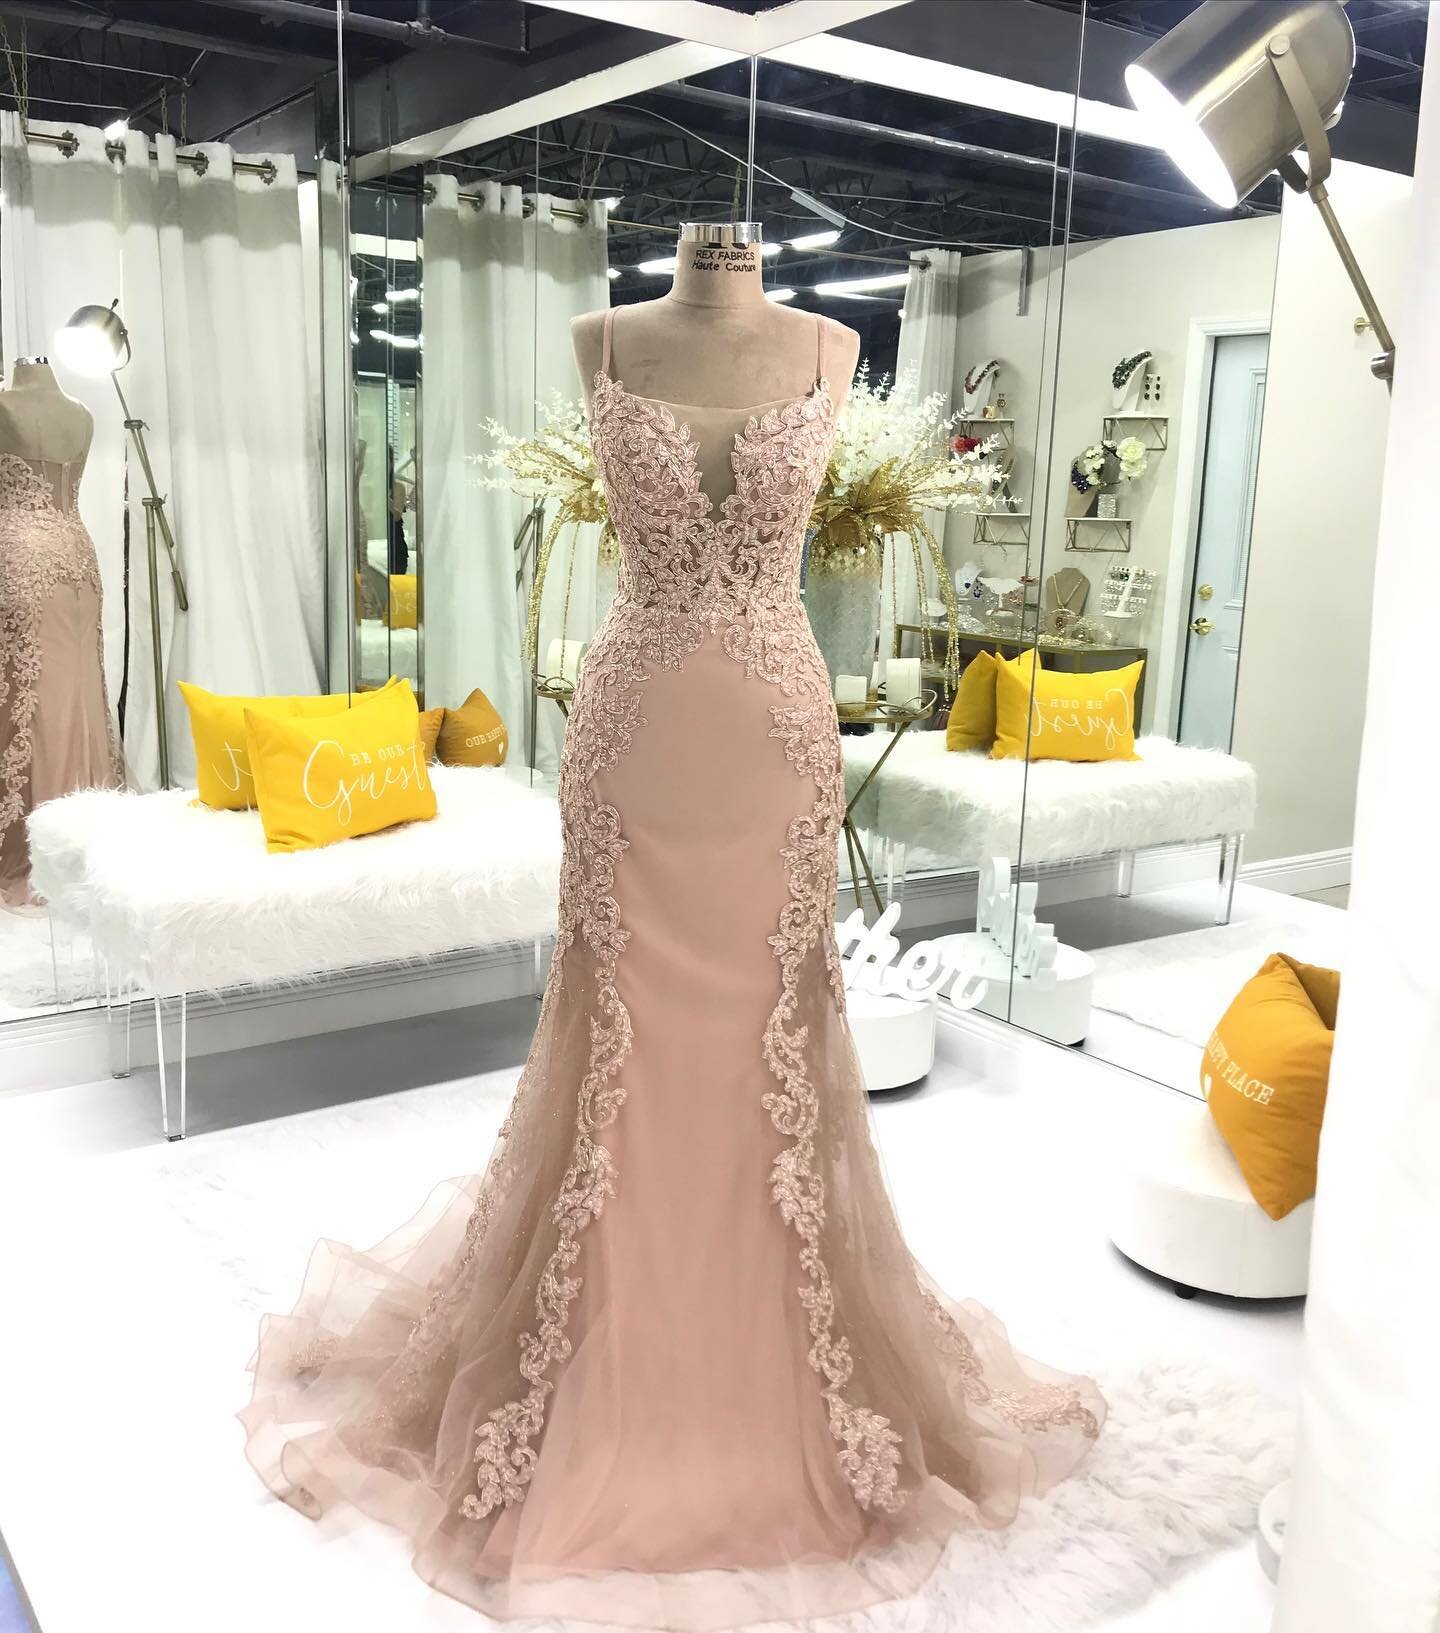 beautiful detailing on this gown !! we have it all 
&bull;
&bull;
&bull;
&bull;

#quince#quinceañeramiami #quinceañera #quincedress #miami#miamidresses #miamidressrental#southflorida #dresses #gowns #dressrental #quinceañeras #quinceaños #quincea